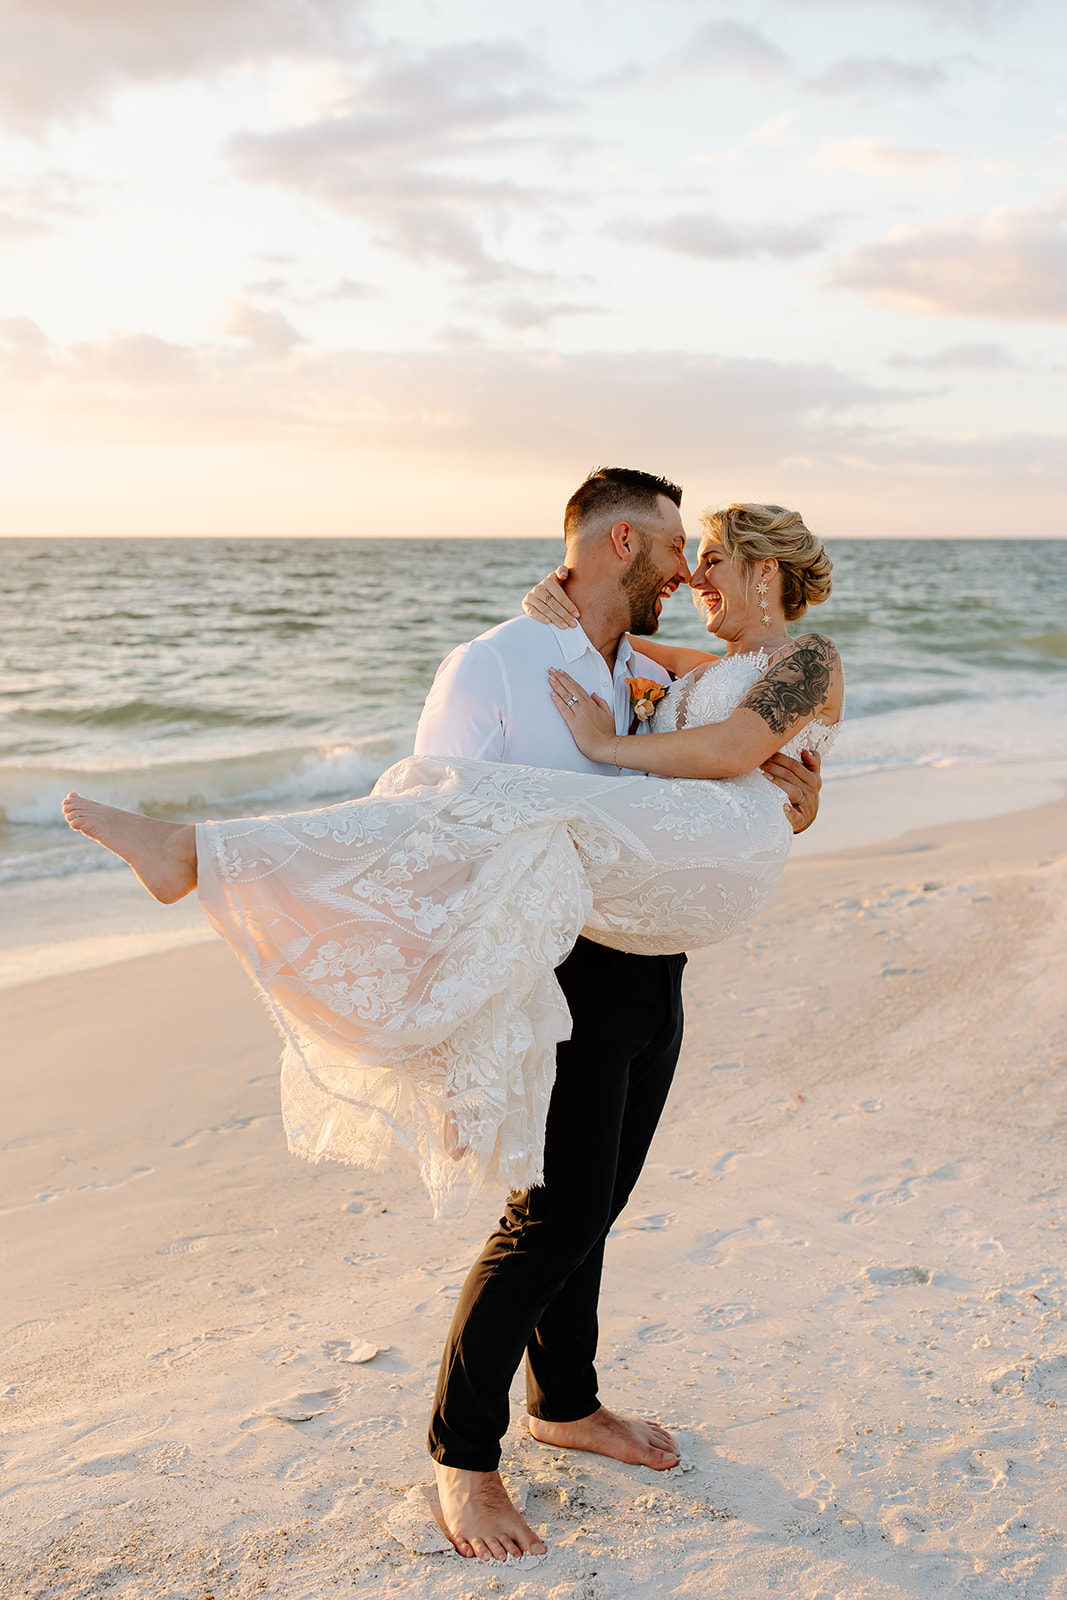 Groom lifts his bride up on the beach in front of the sunset